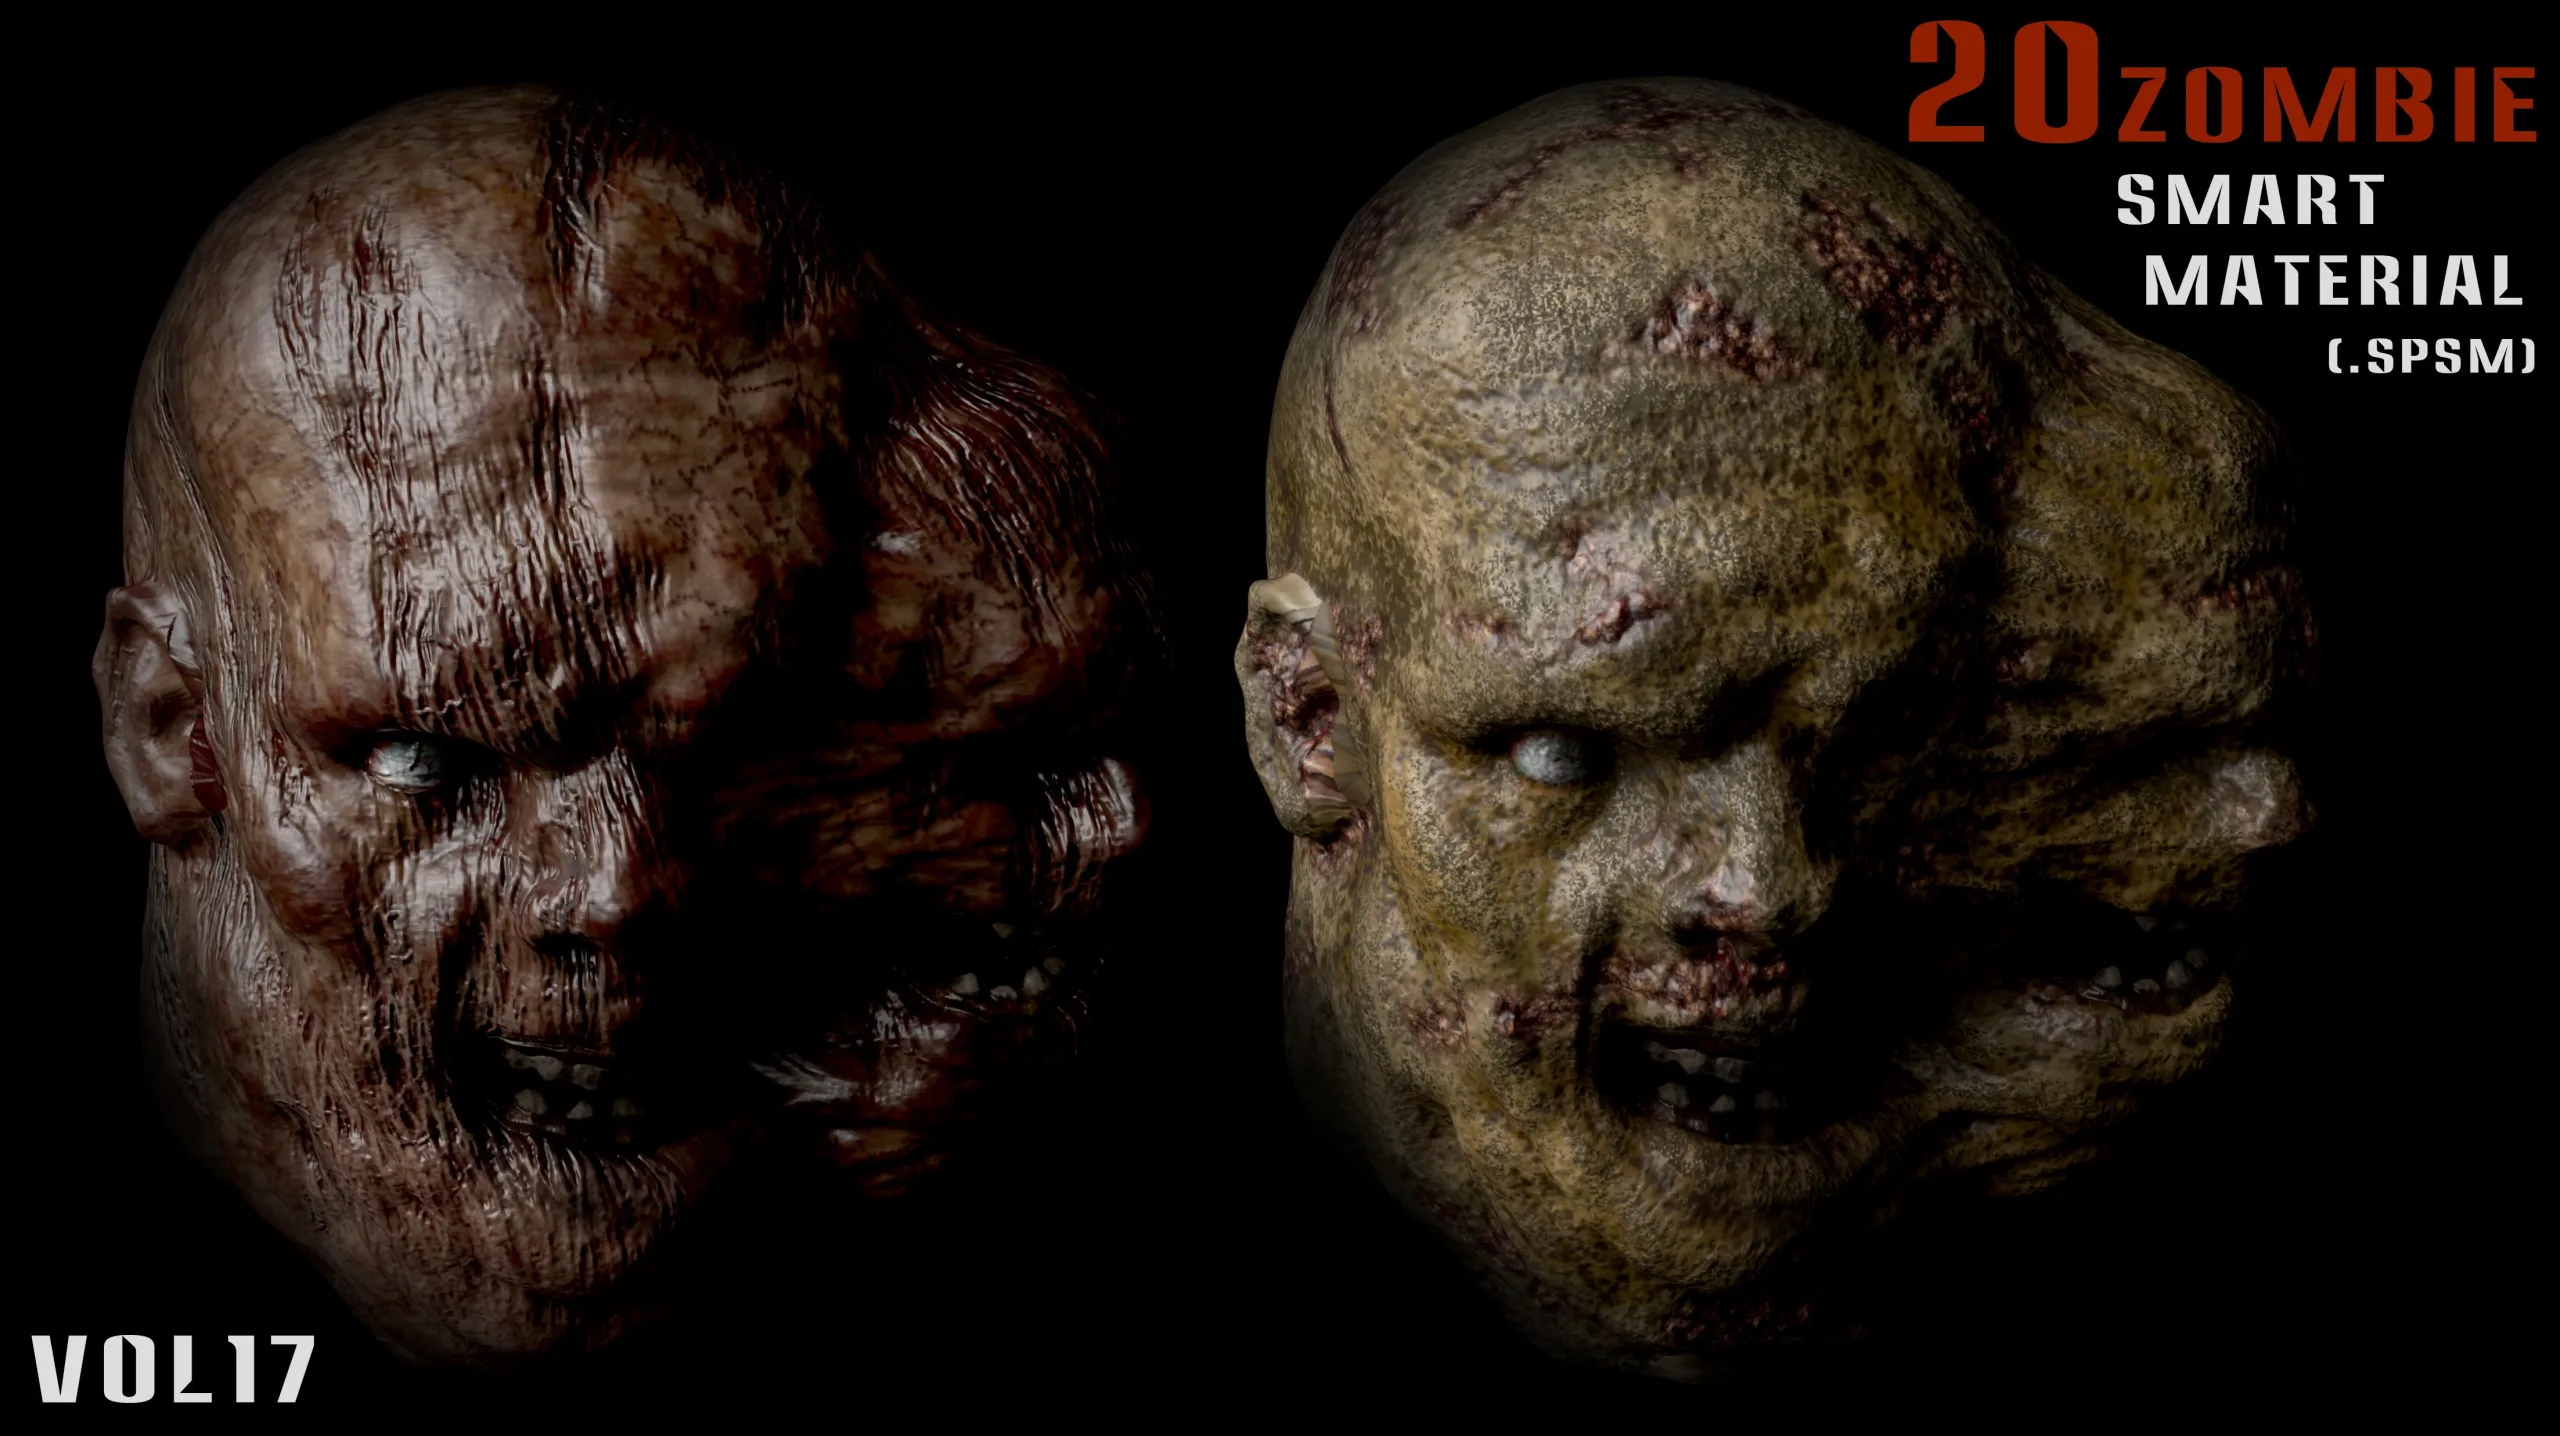 20 Zombie Smart Material for Substance Painter-Vol17